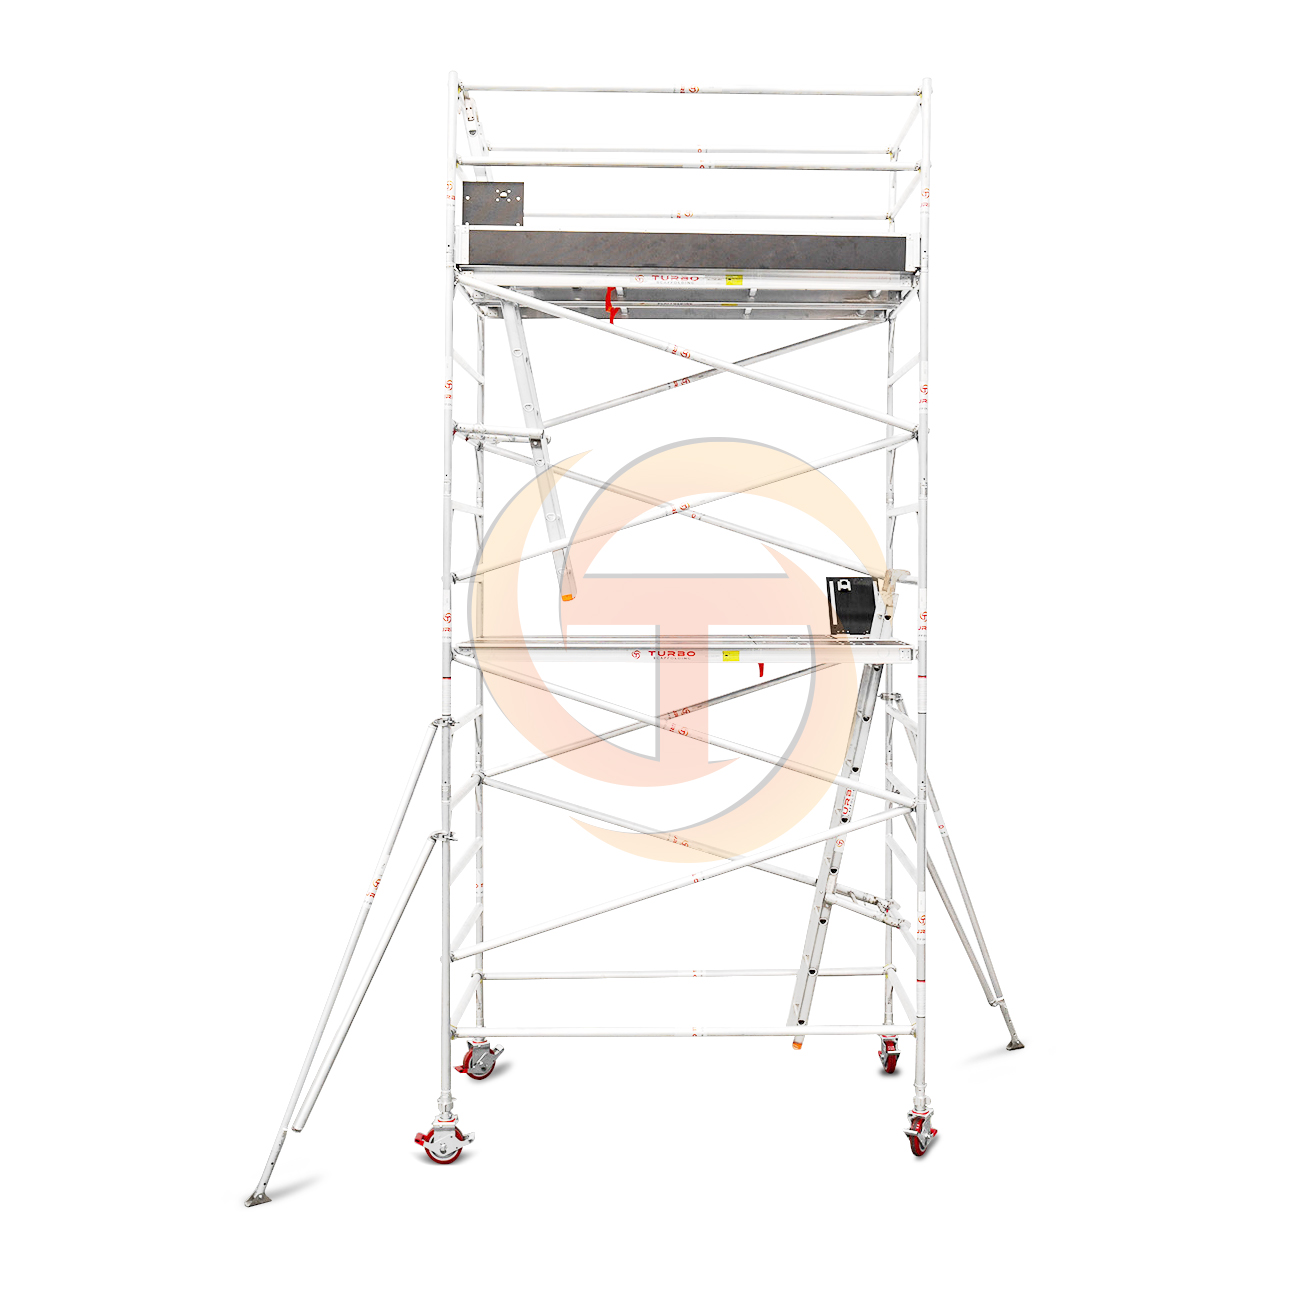 4.7m – 5.0m Wide Aluminium Mobile Scaffold Tower (Standing Height)